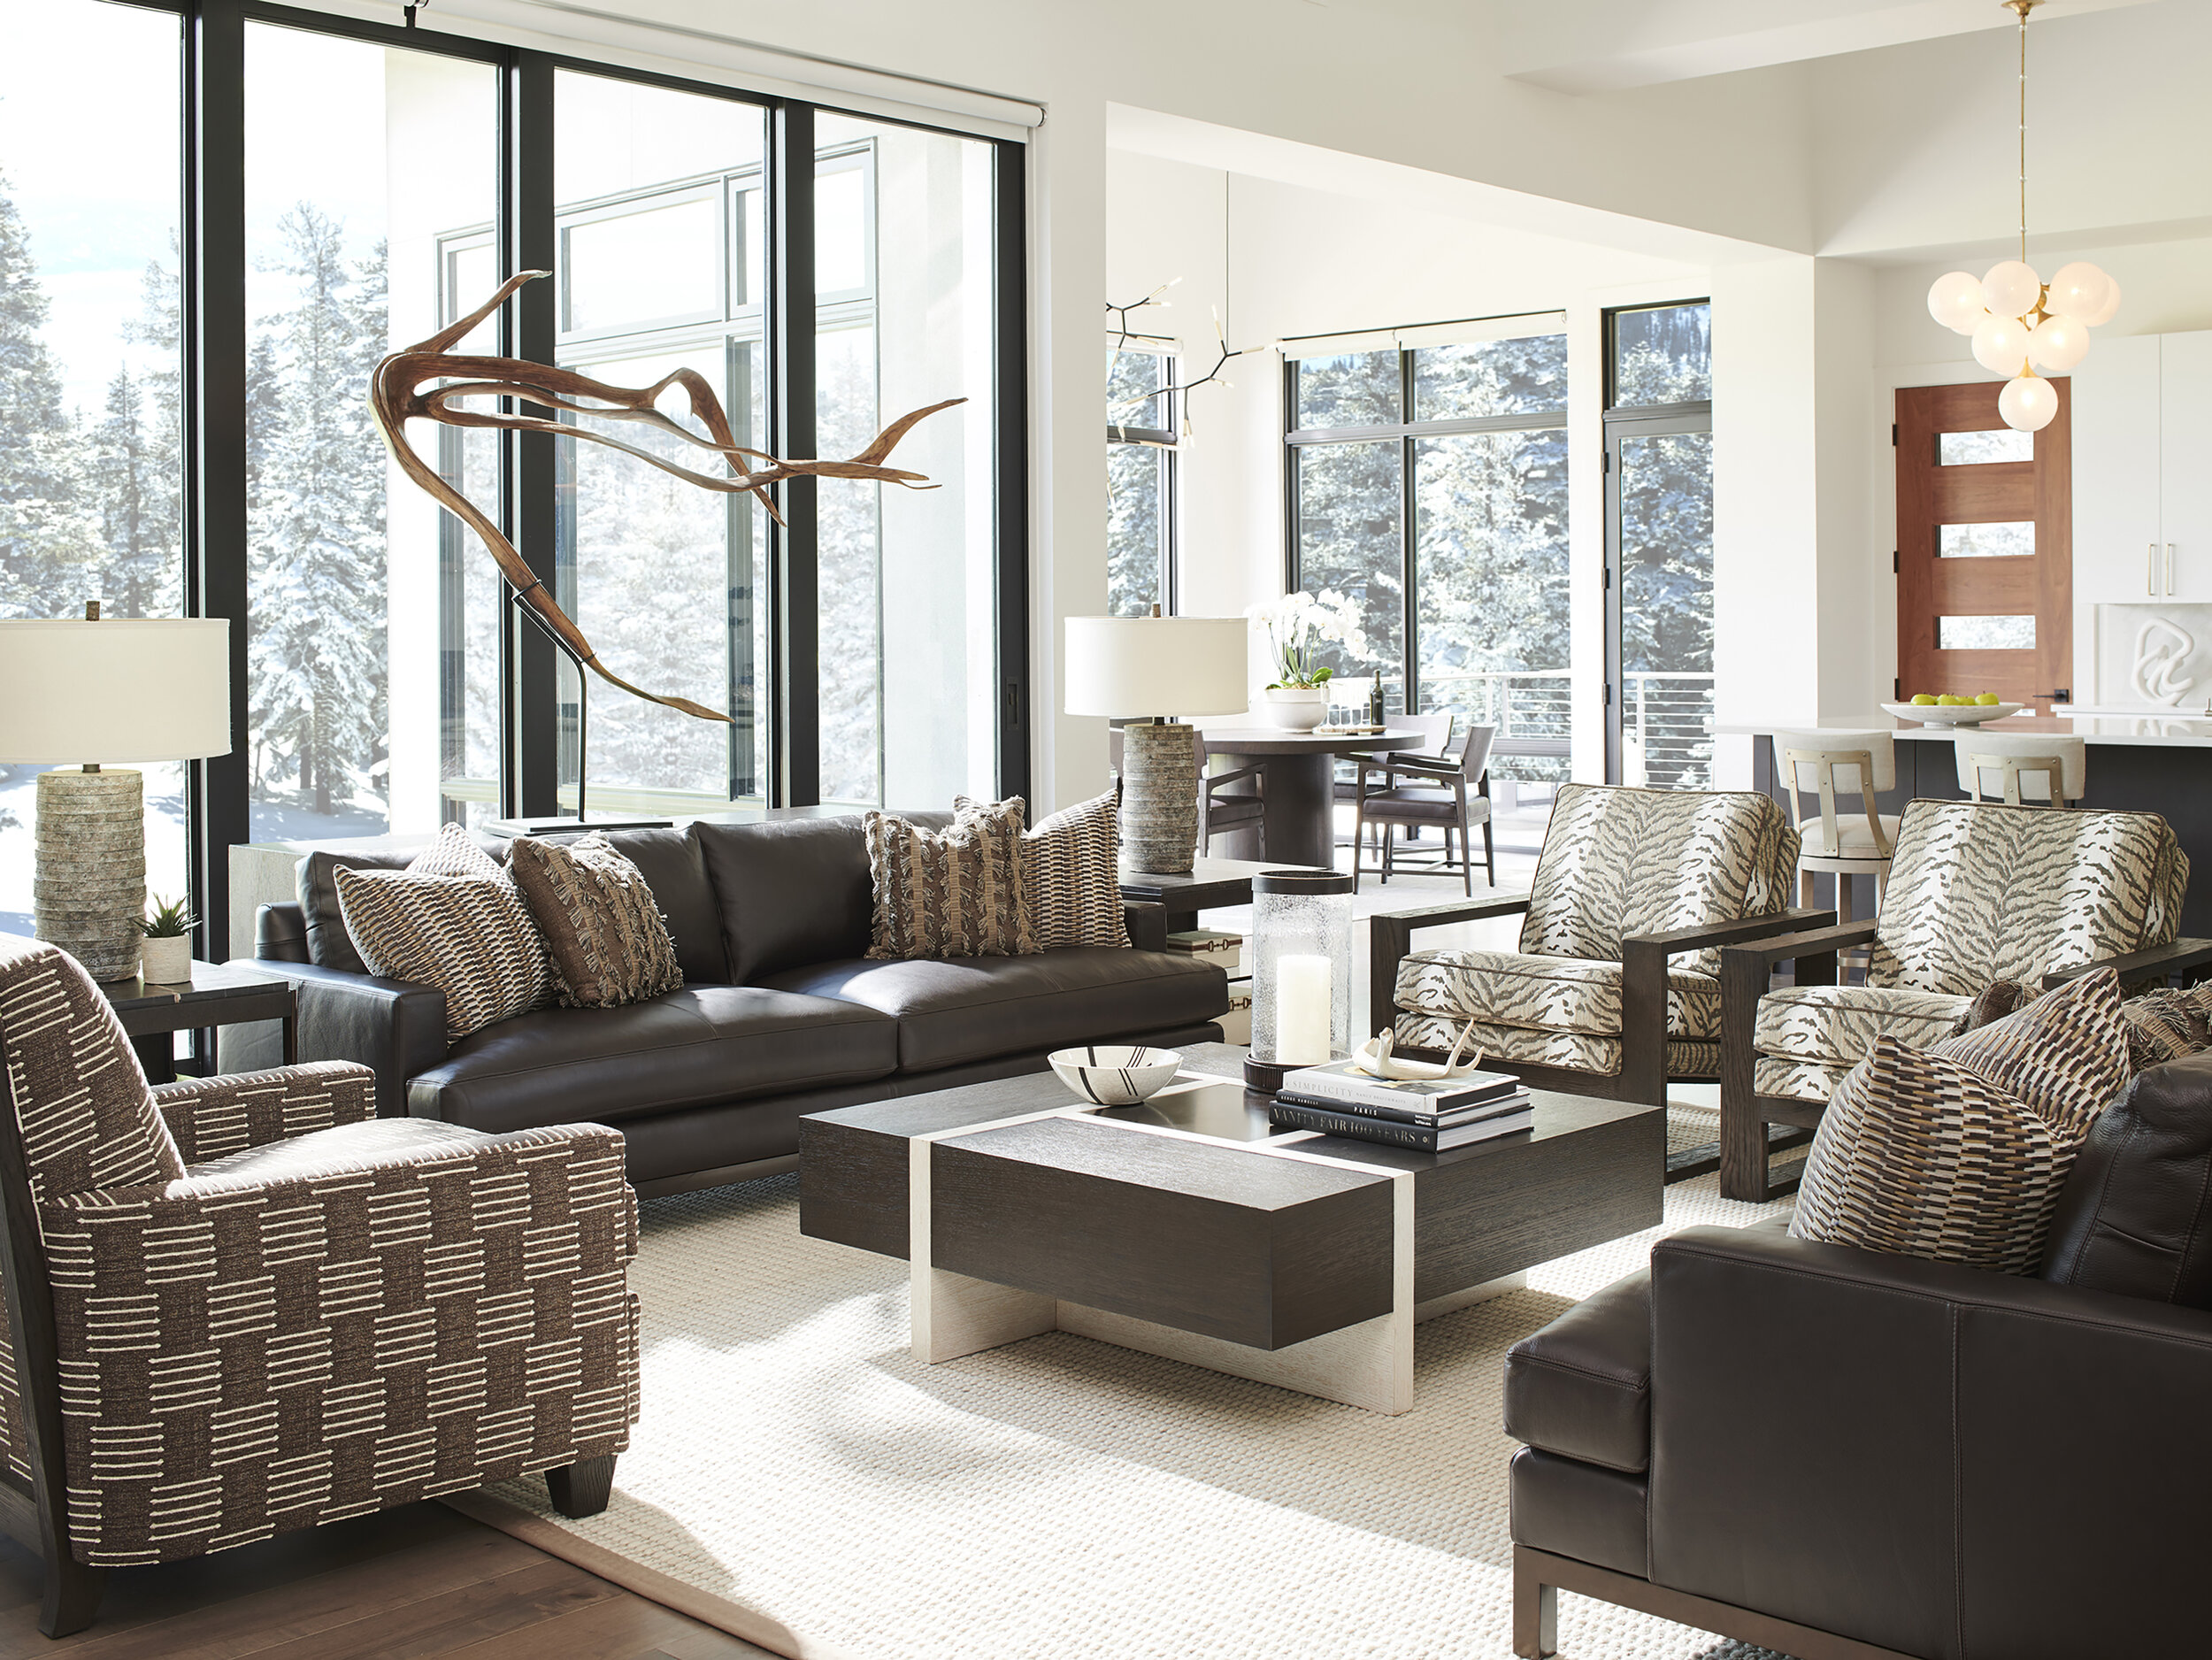 Park City utilizes a mix of fabrics and leathers.